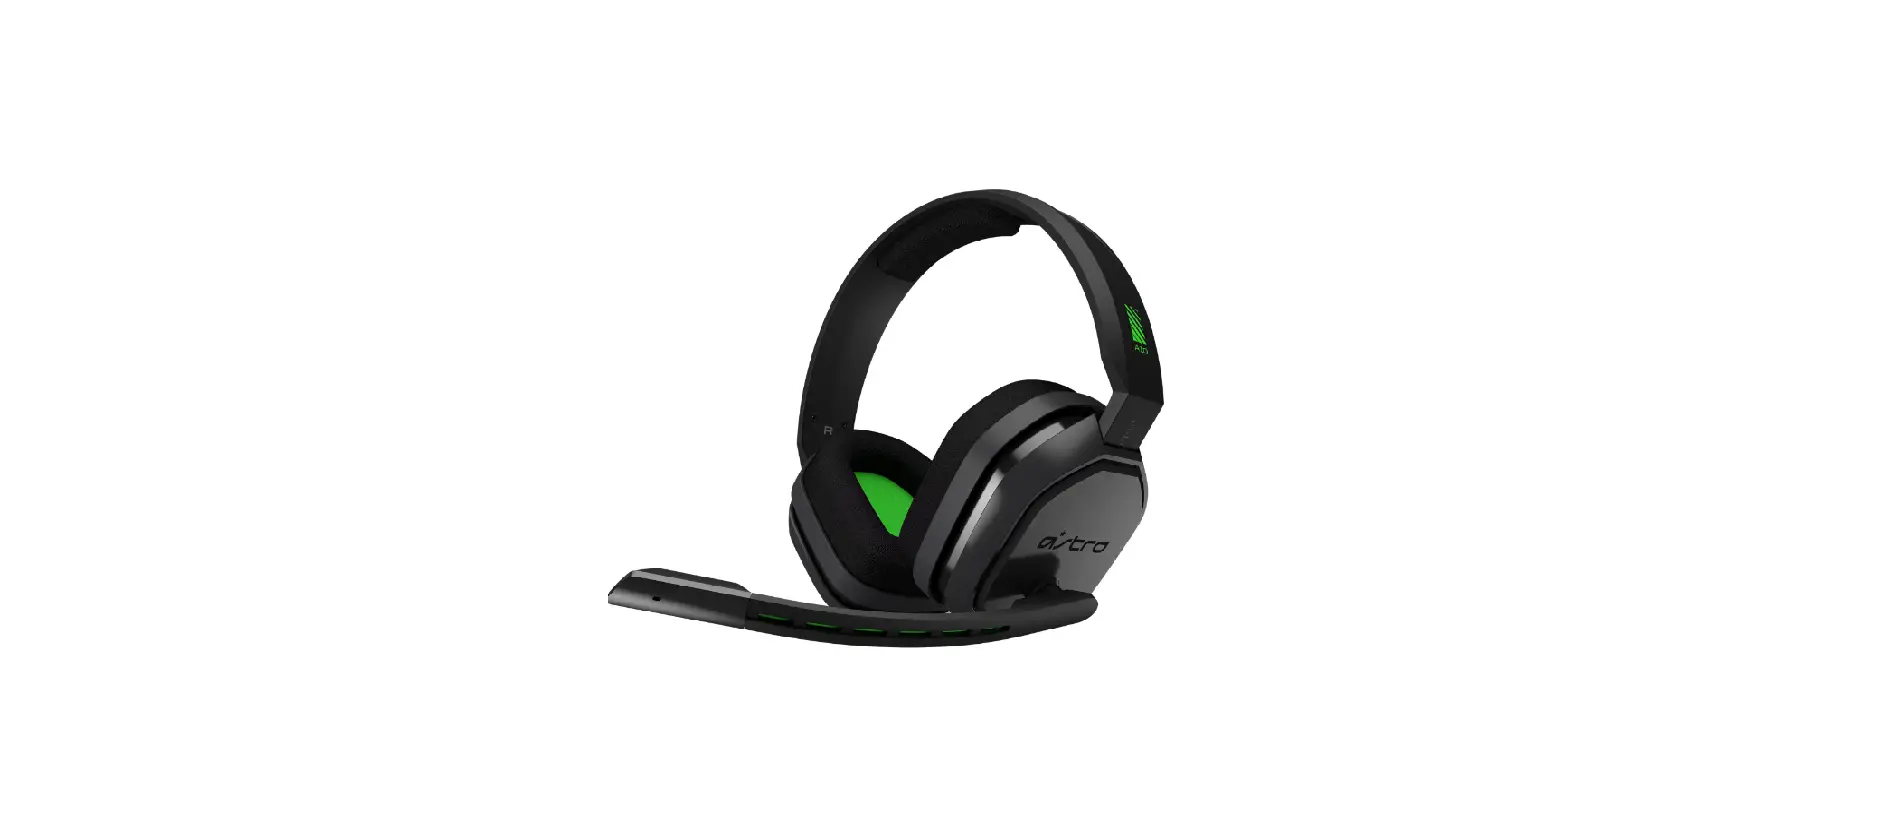 a10-headset-xbox-one-connection-a-quick-setup-guide